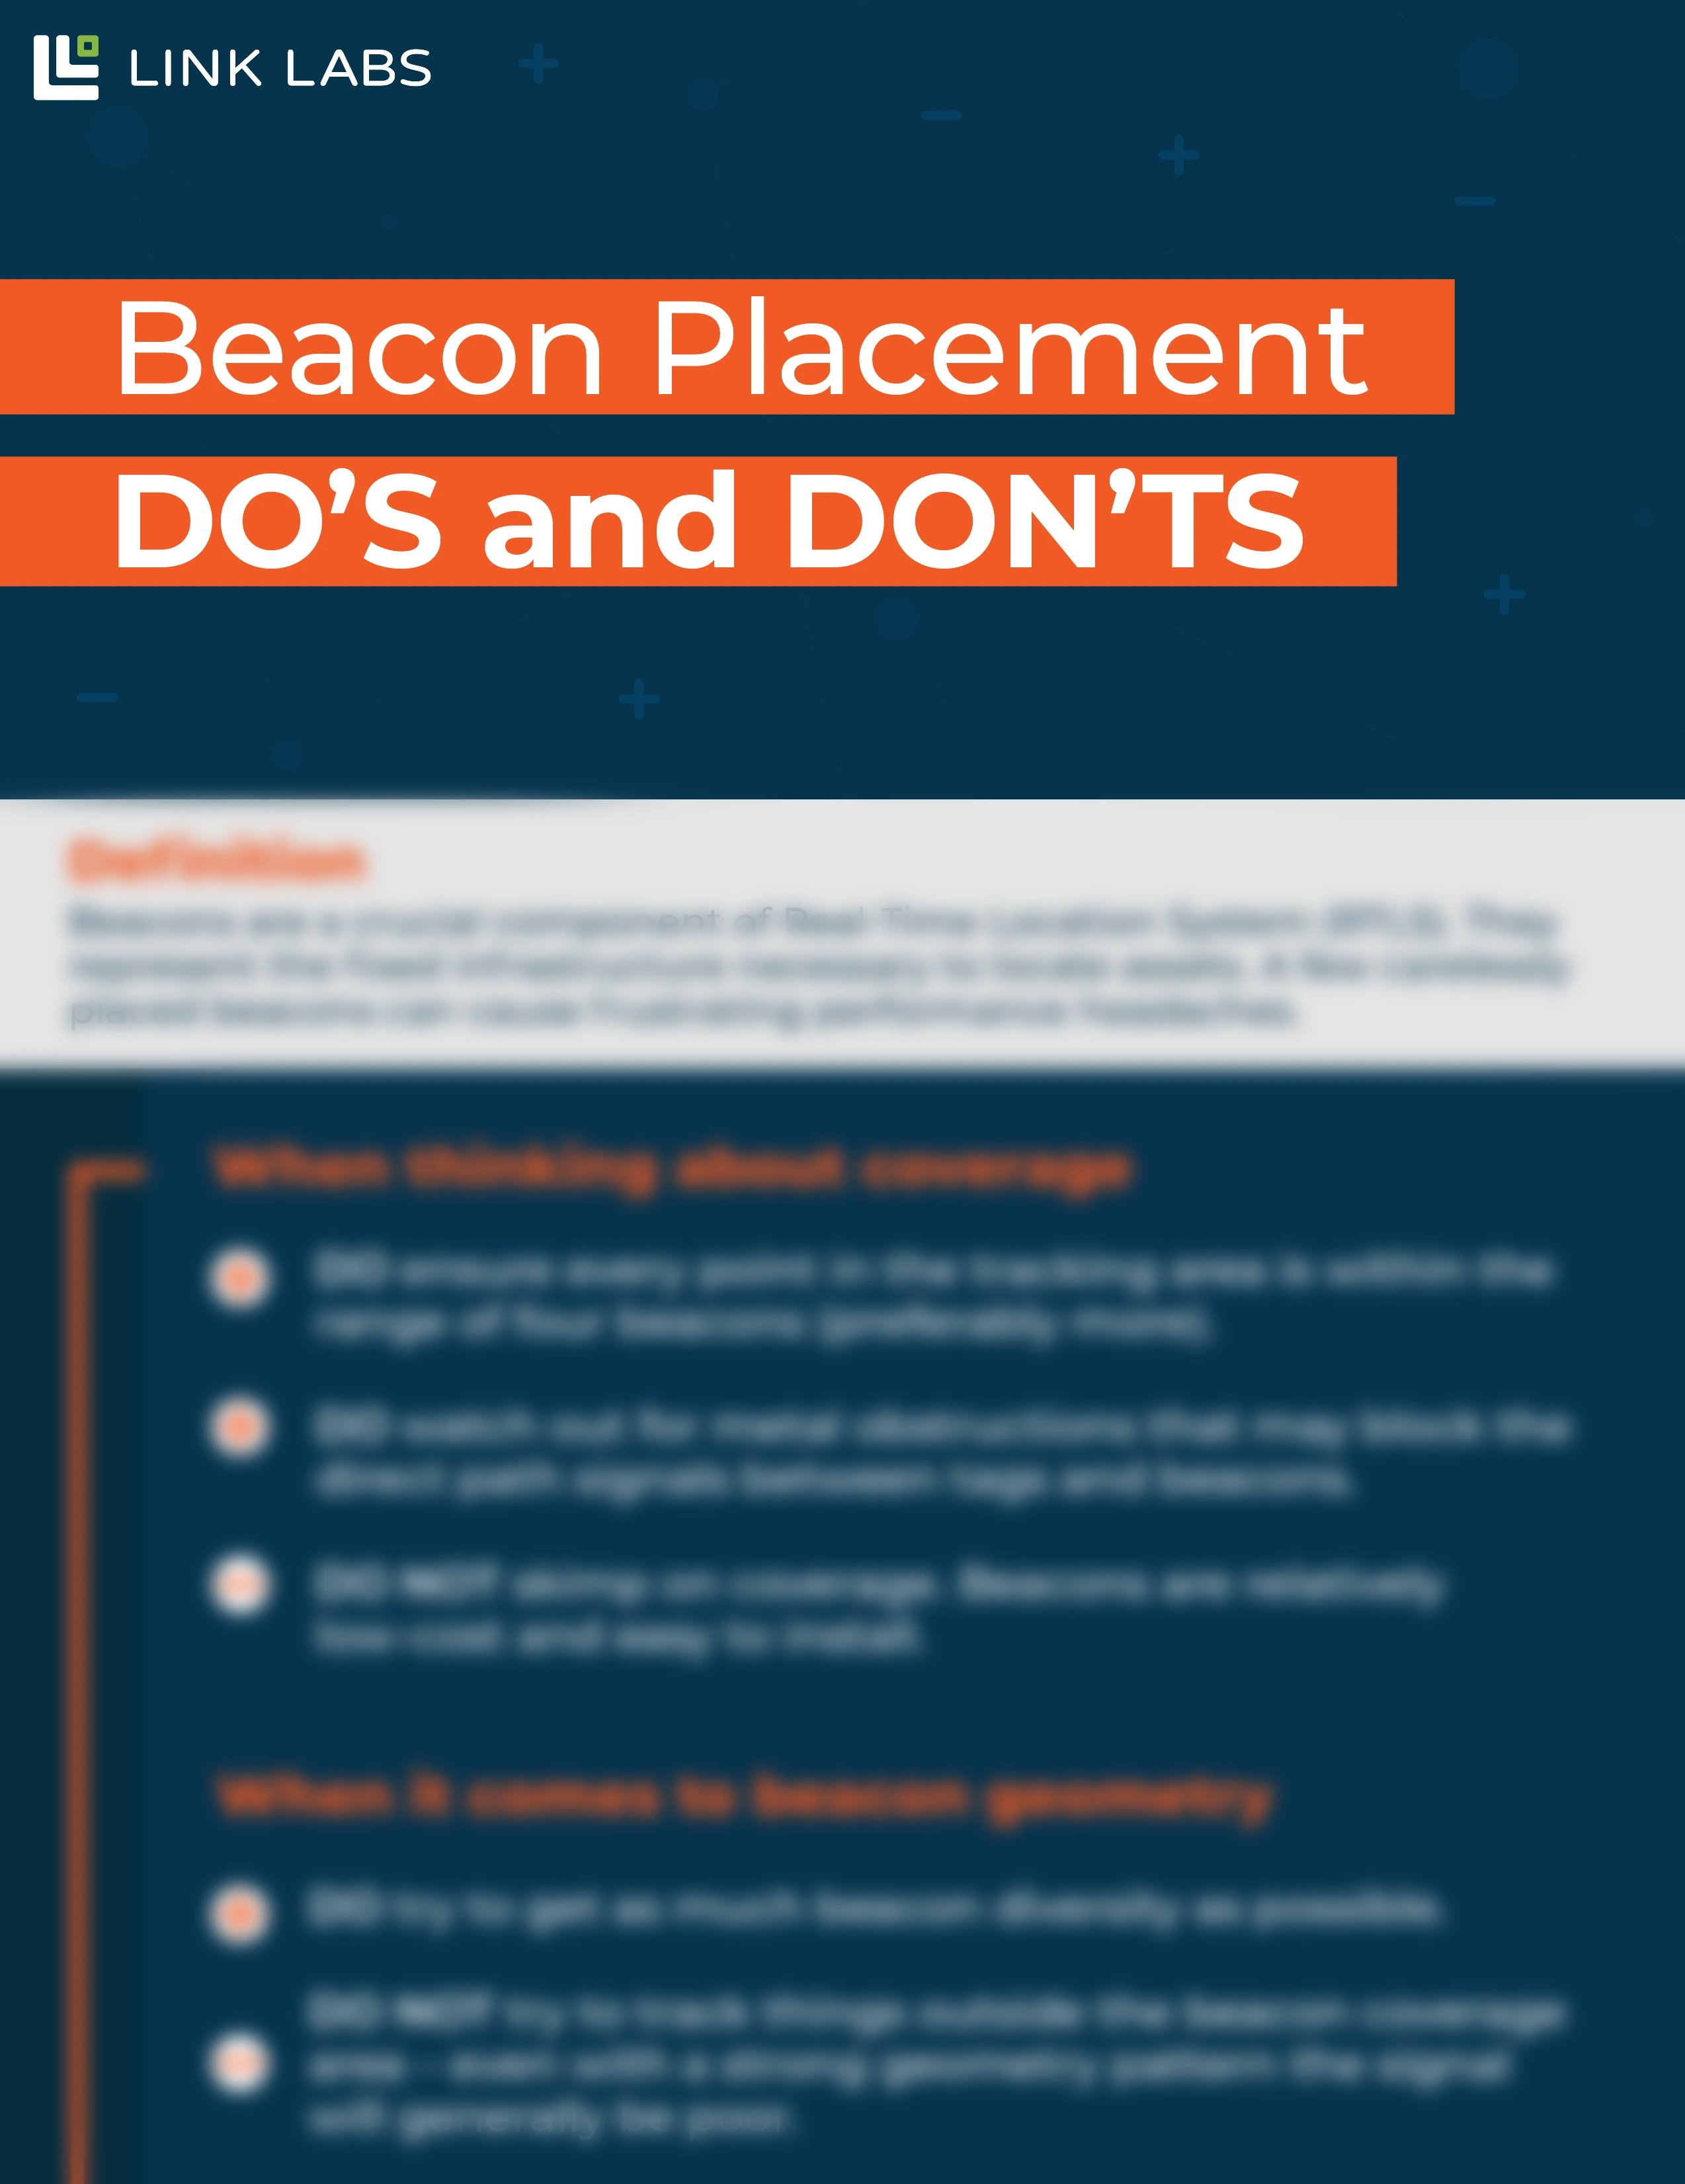 Beacon Placements Dos and Donts-Infographic-01